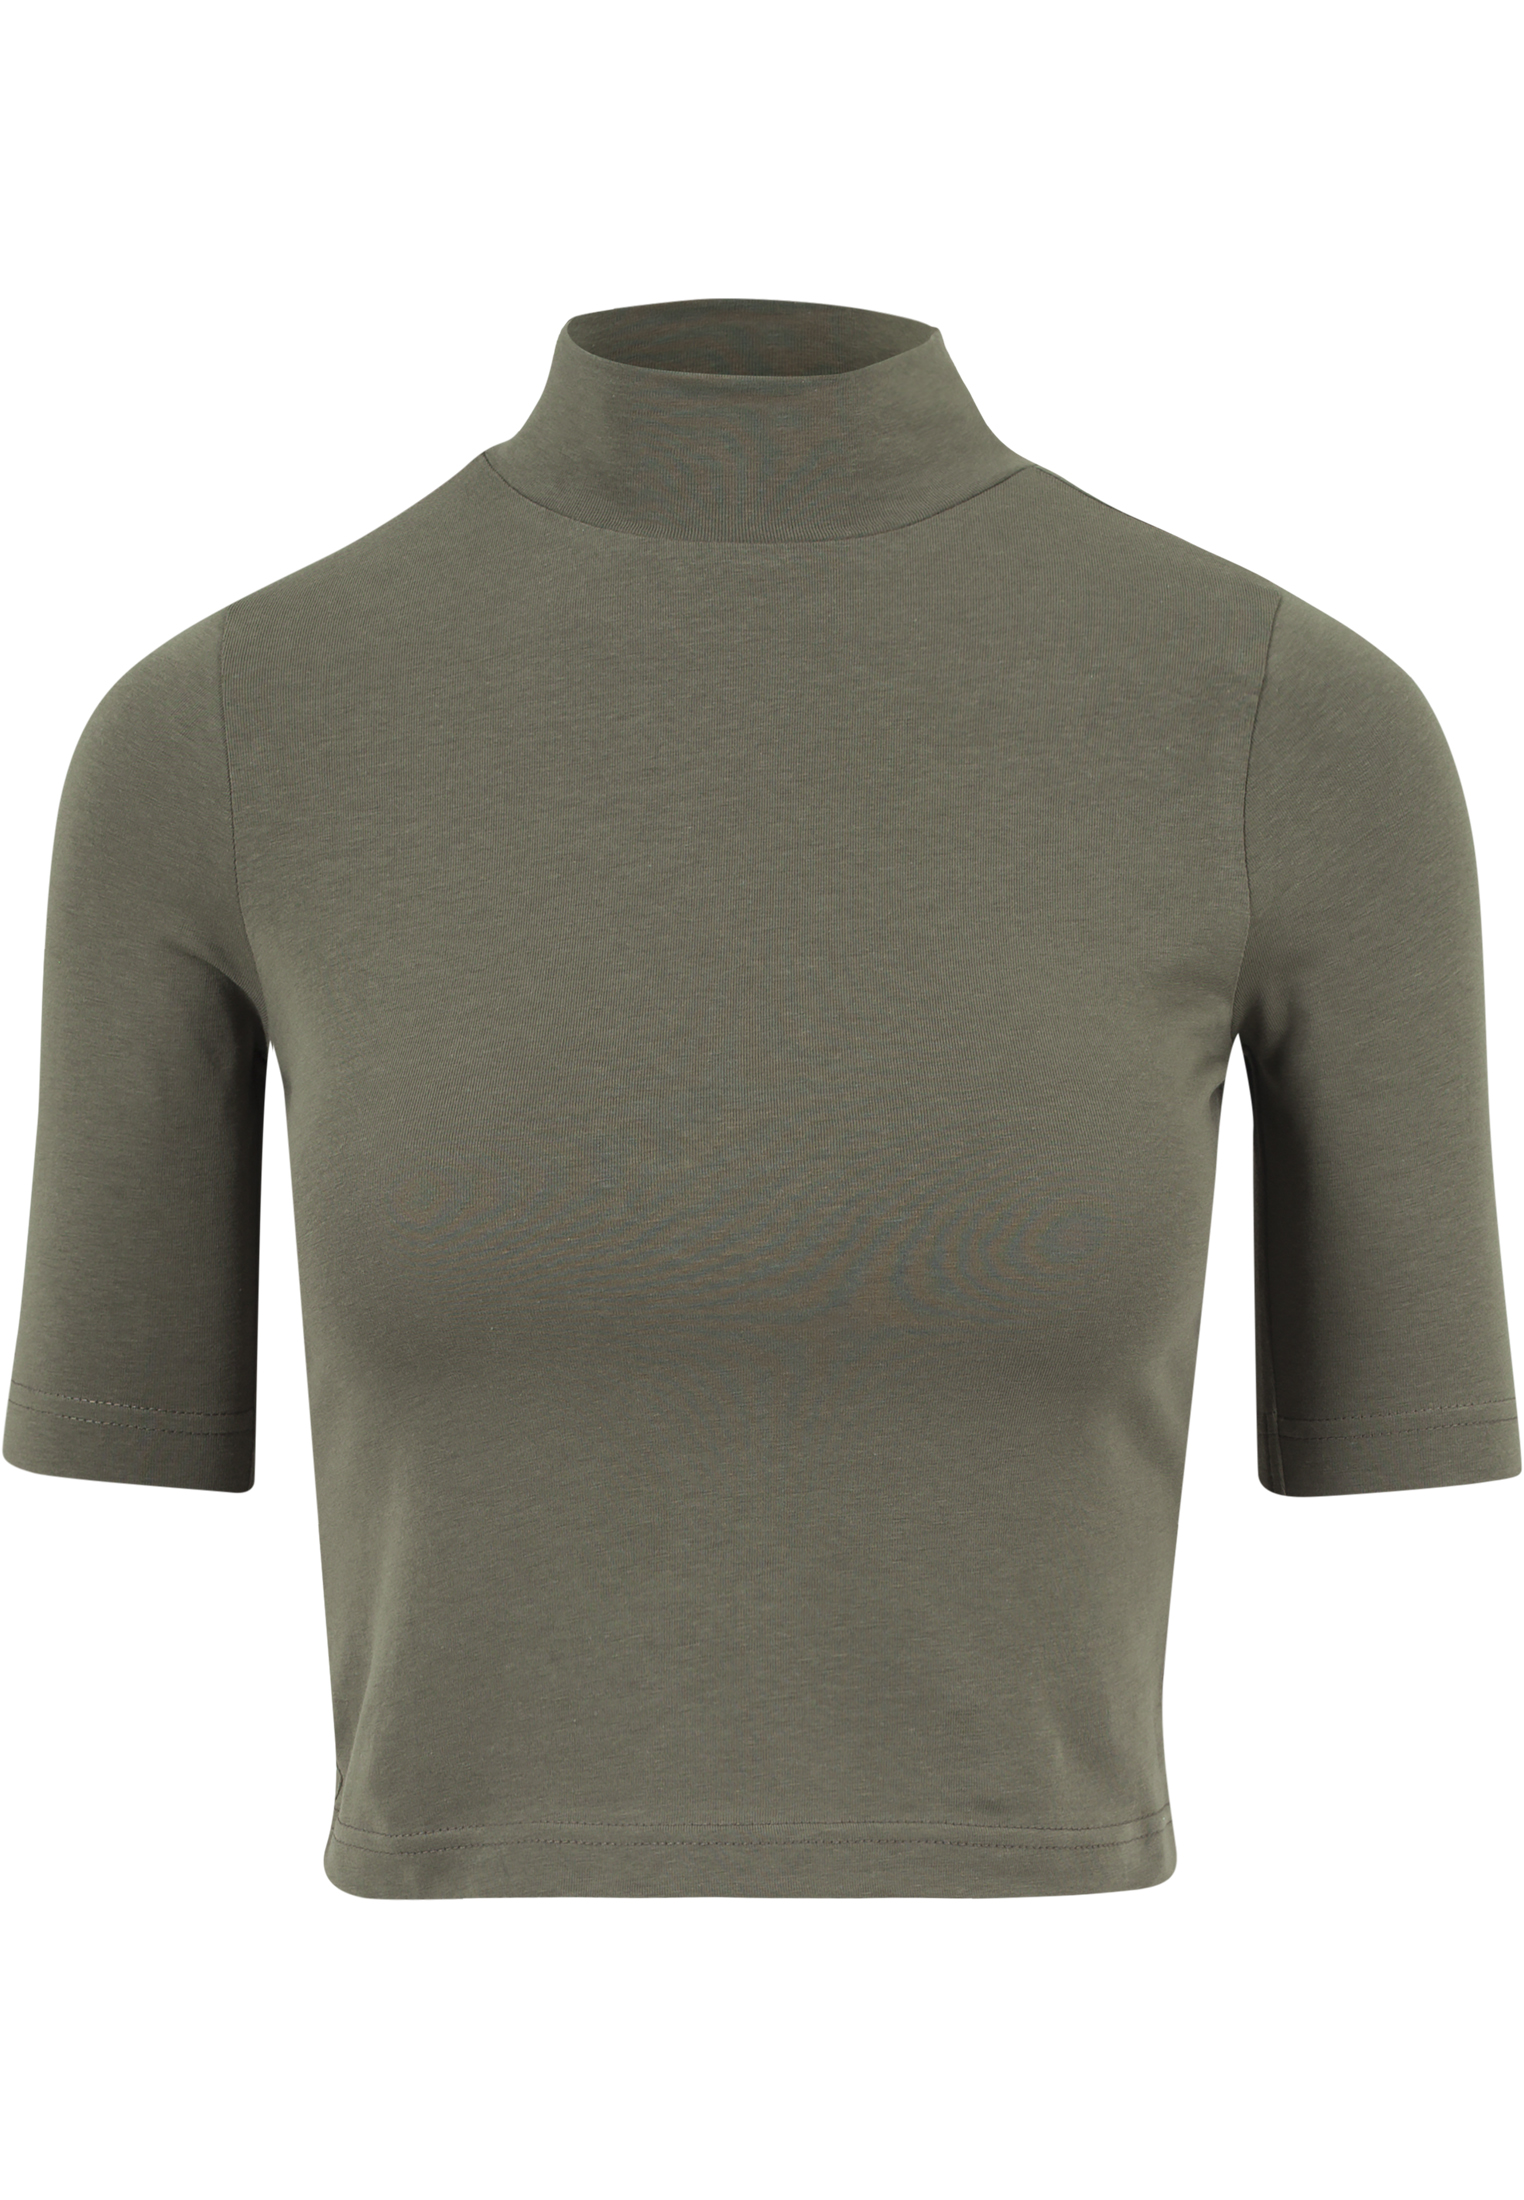 Cropped Tees Ladies Cropped Turtleneck Tee in Farbe olive